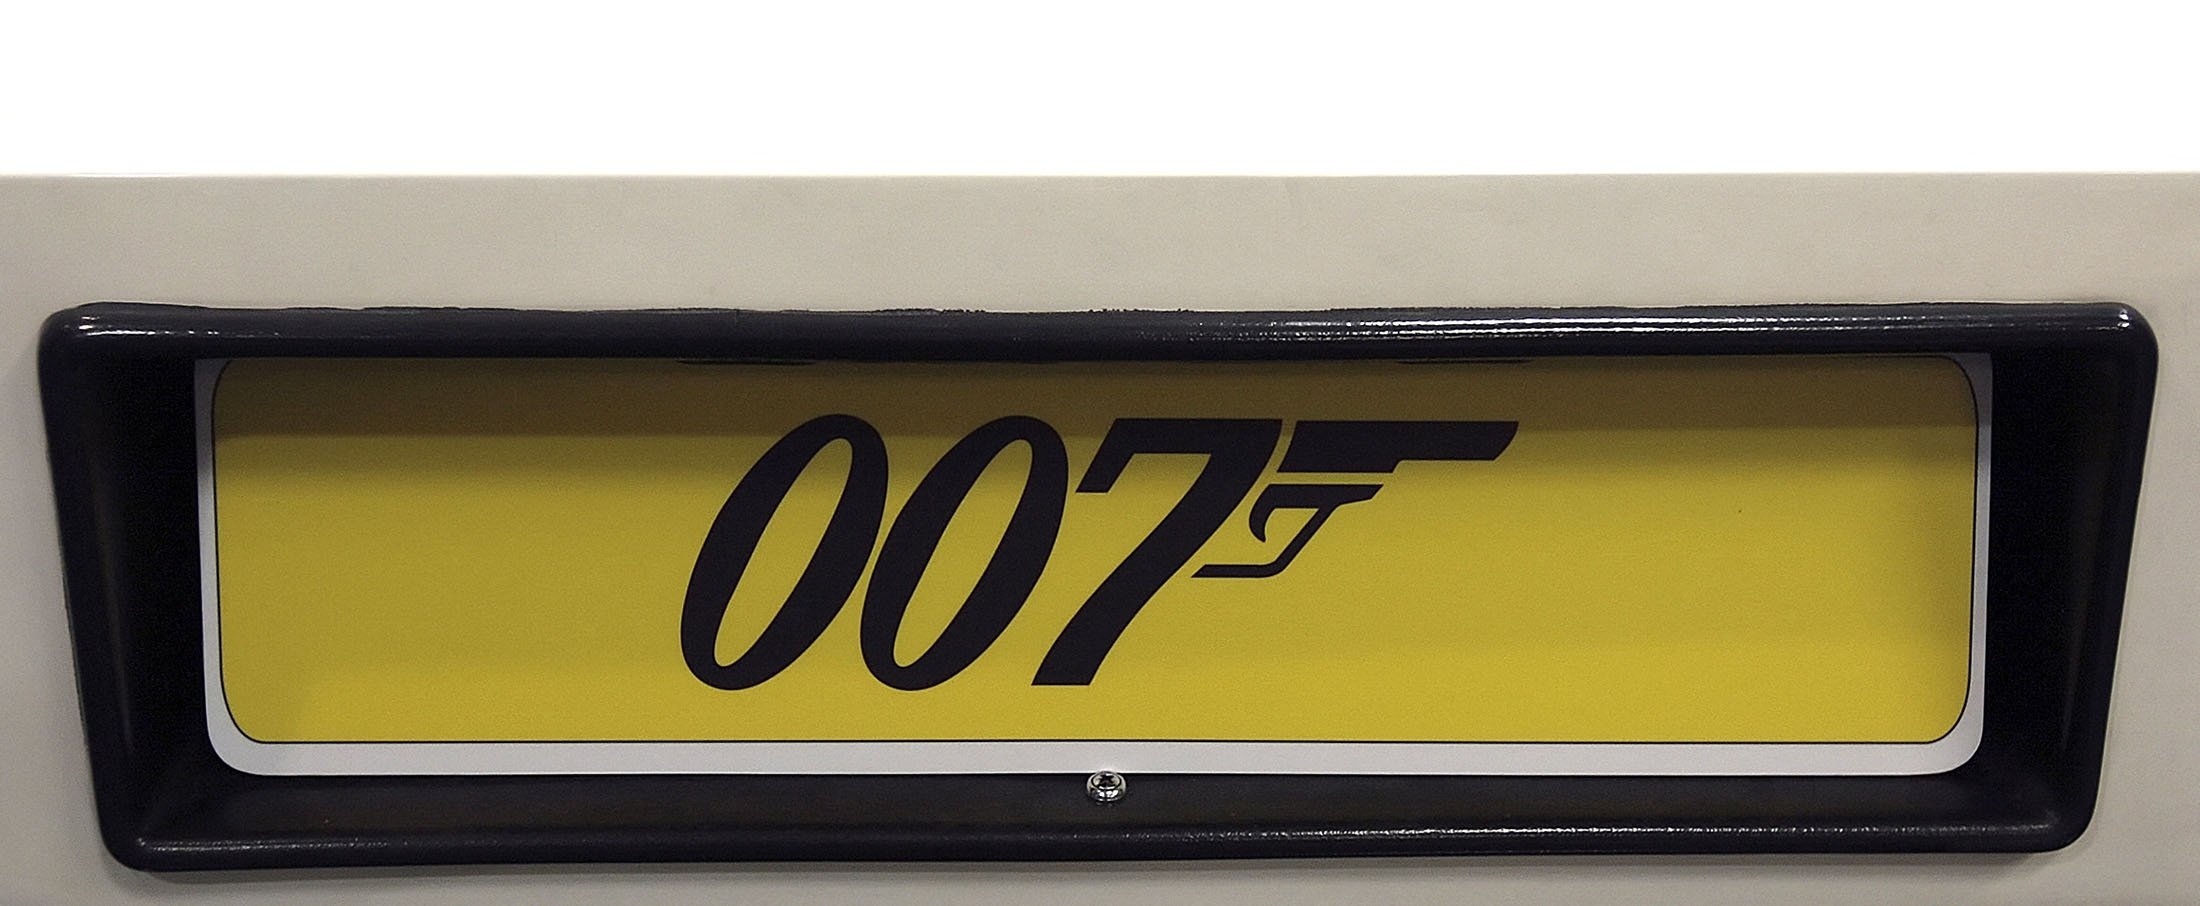 The logo of 007 on the 1976 Lotus Esprit Coupe used in the James Bond film 'The Spy Who Loved Me,' shown in the Bonham's auction room in London, U.K., Dec. 1, 2008. (AFP Photo)